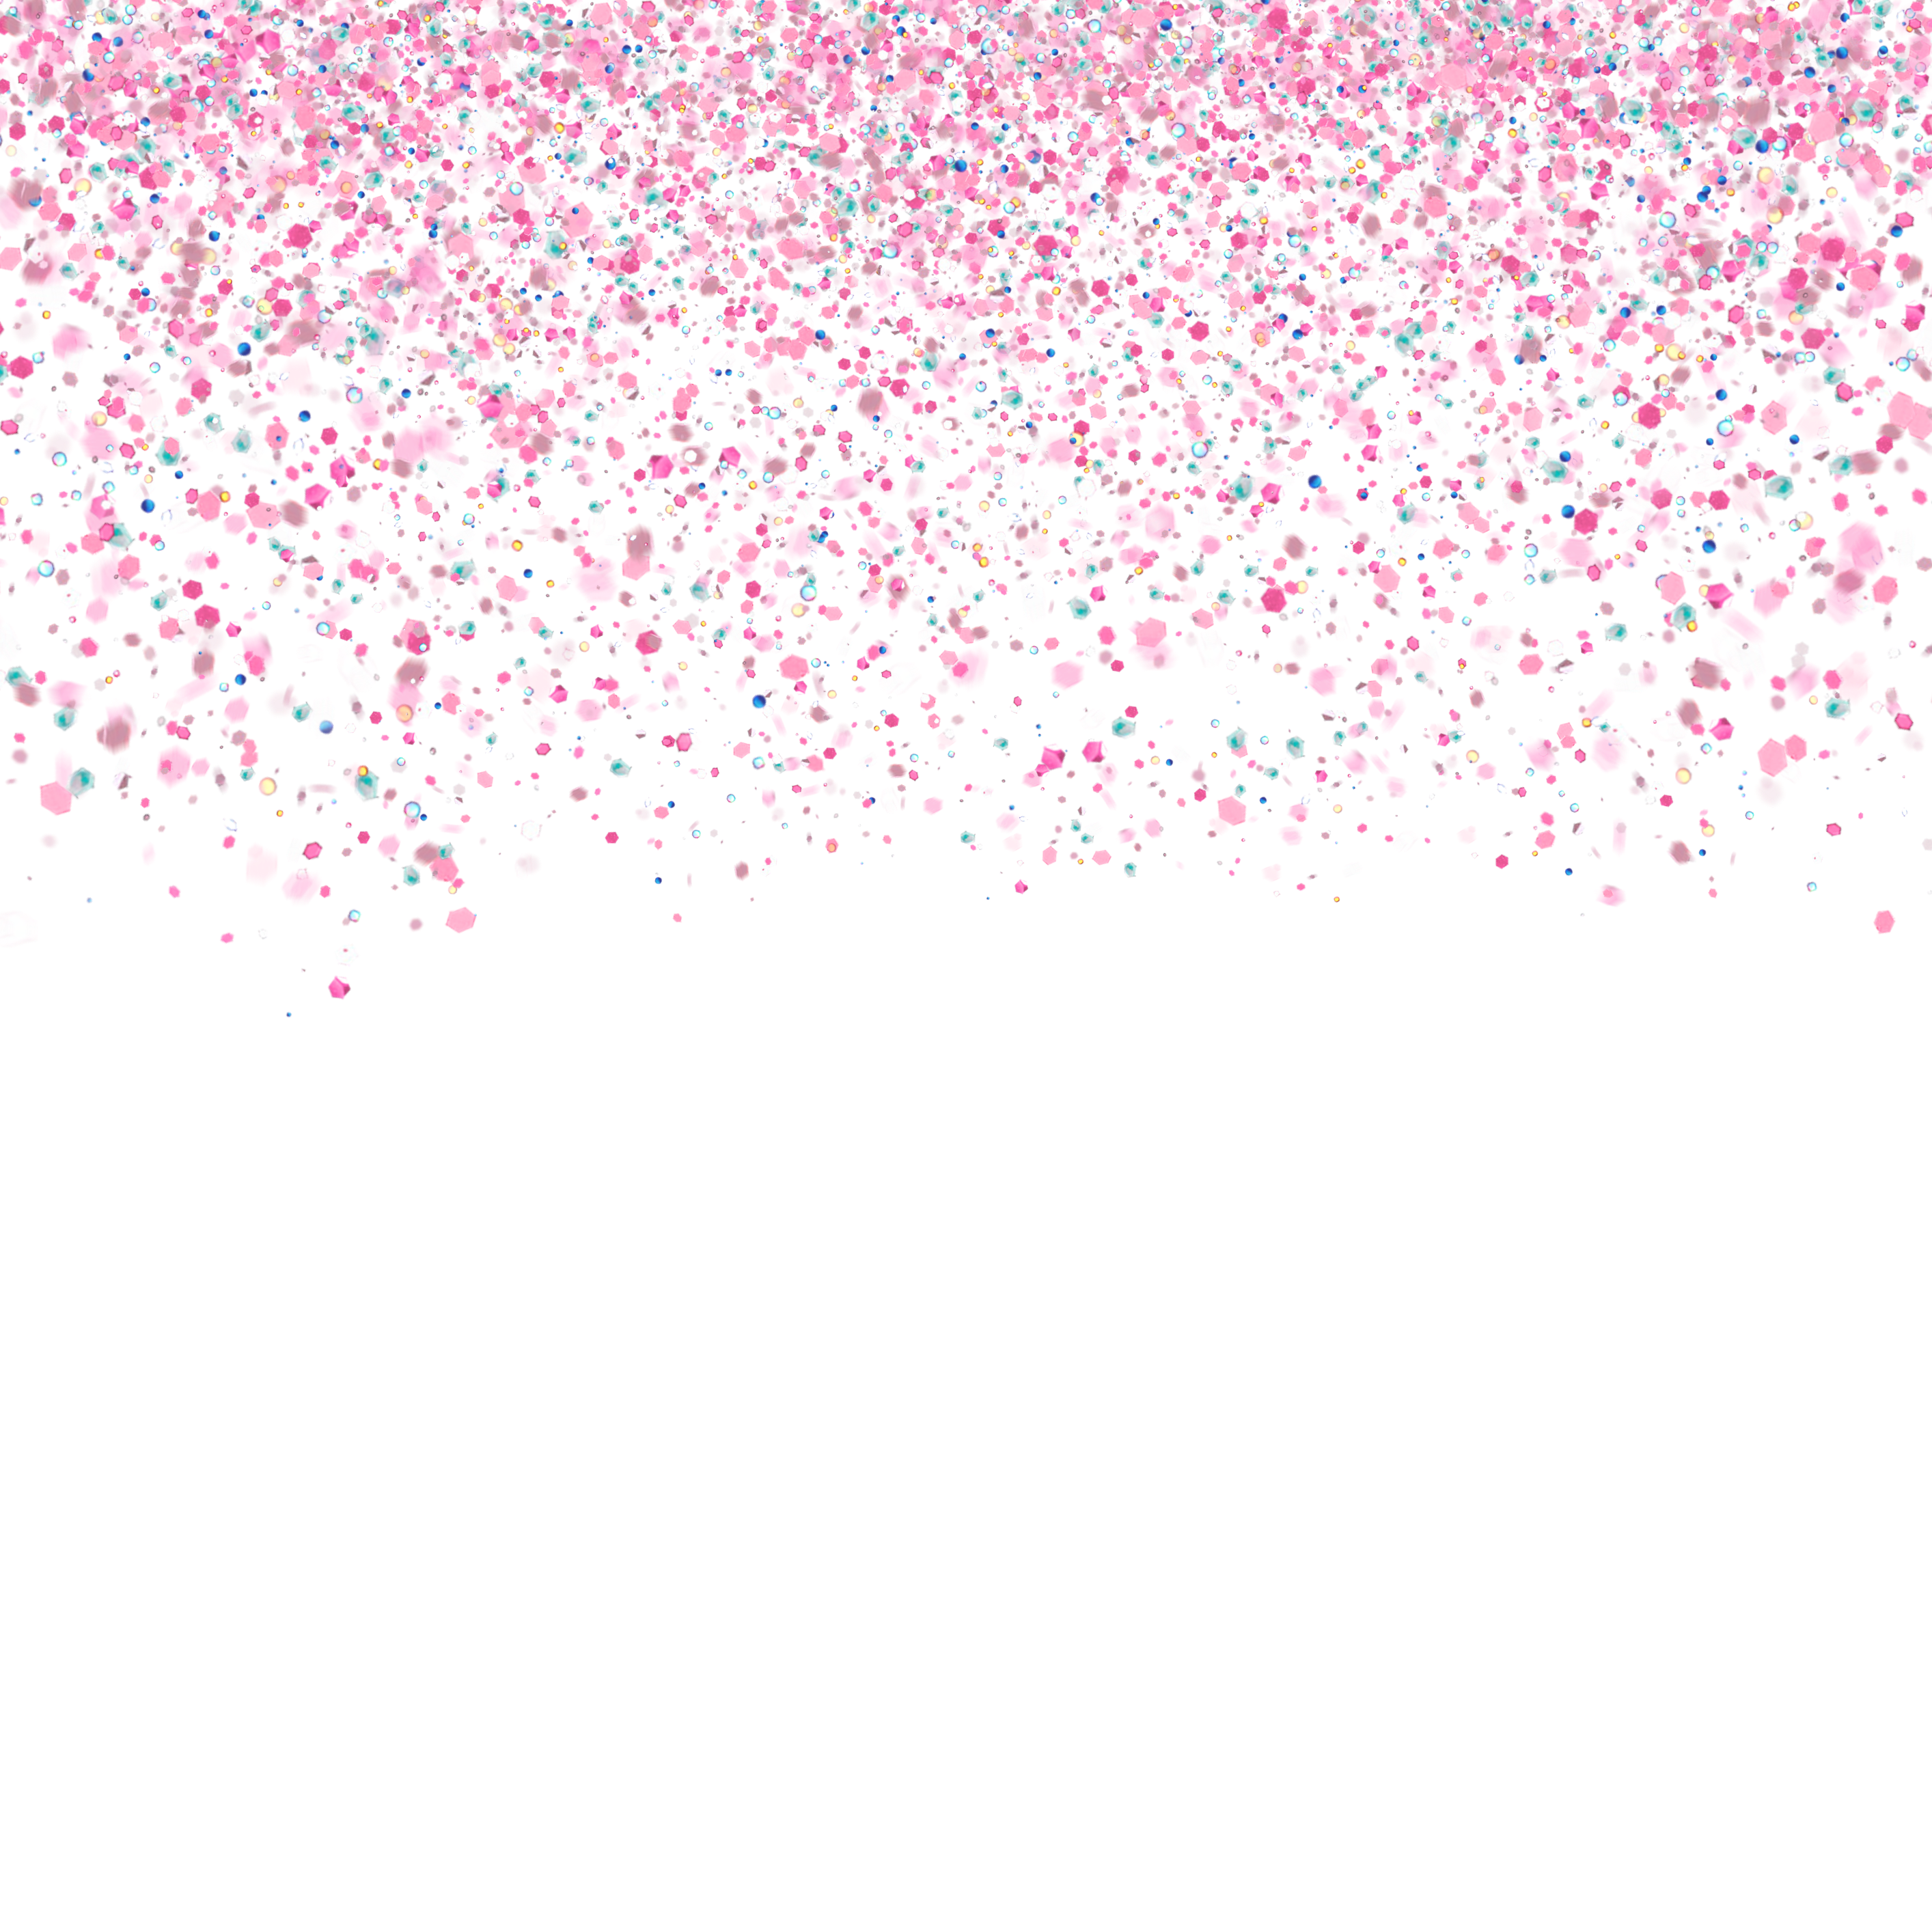 This visual is about fade confetti glitter pinkframe pretty freetoedit #fad...